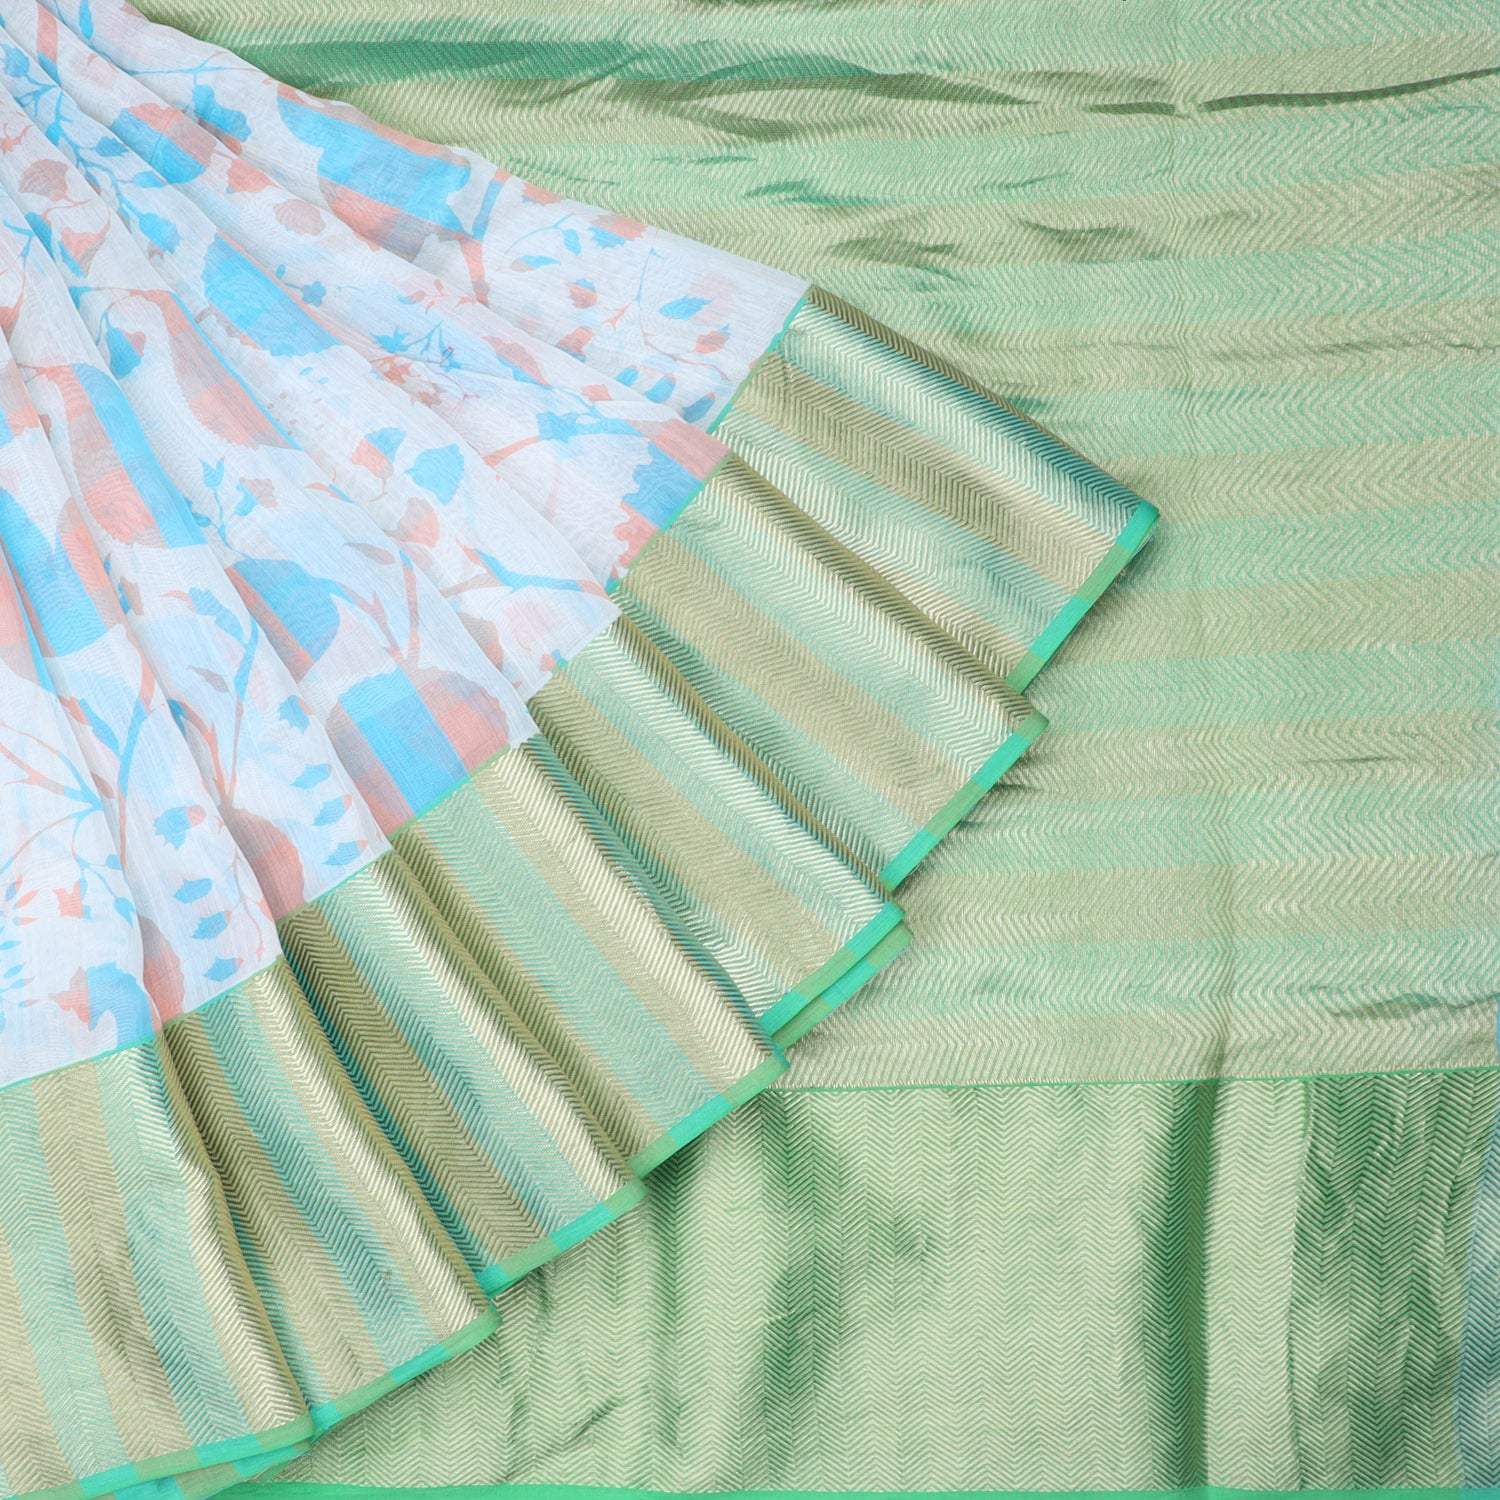 White Chanderi Saree With Printed Floral And Bird Motifs - Singhania's